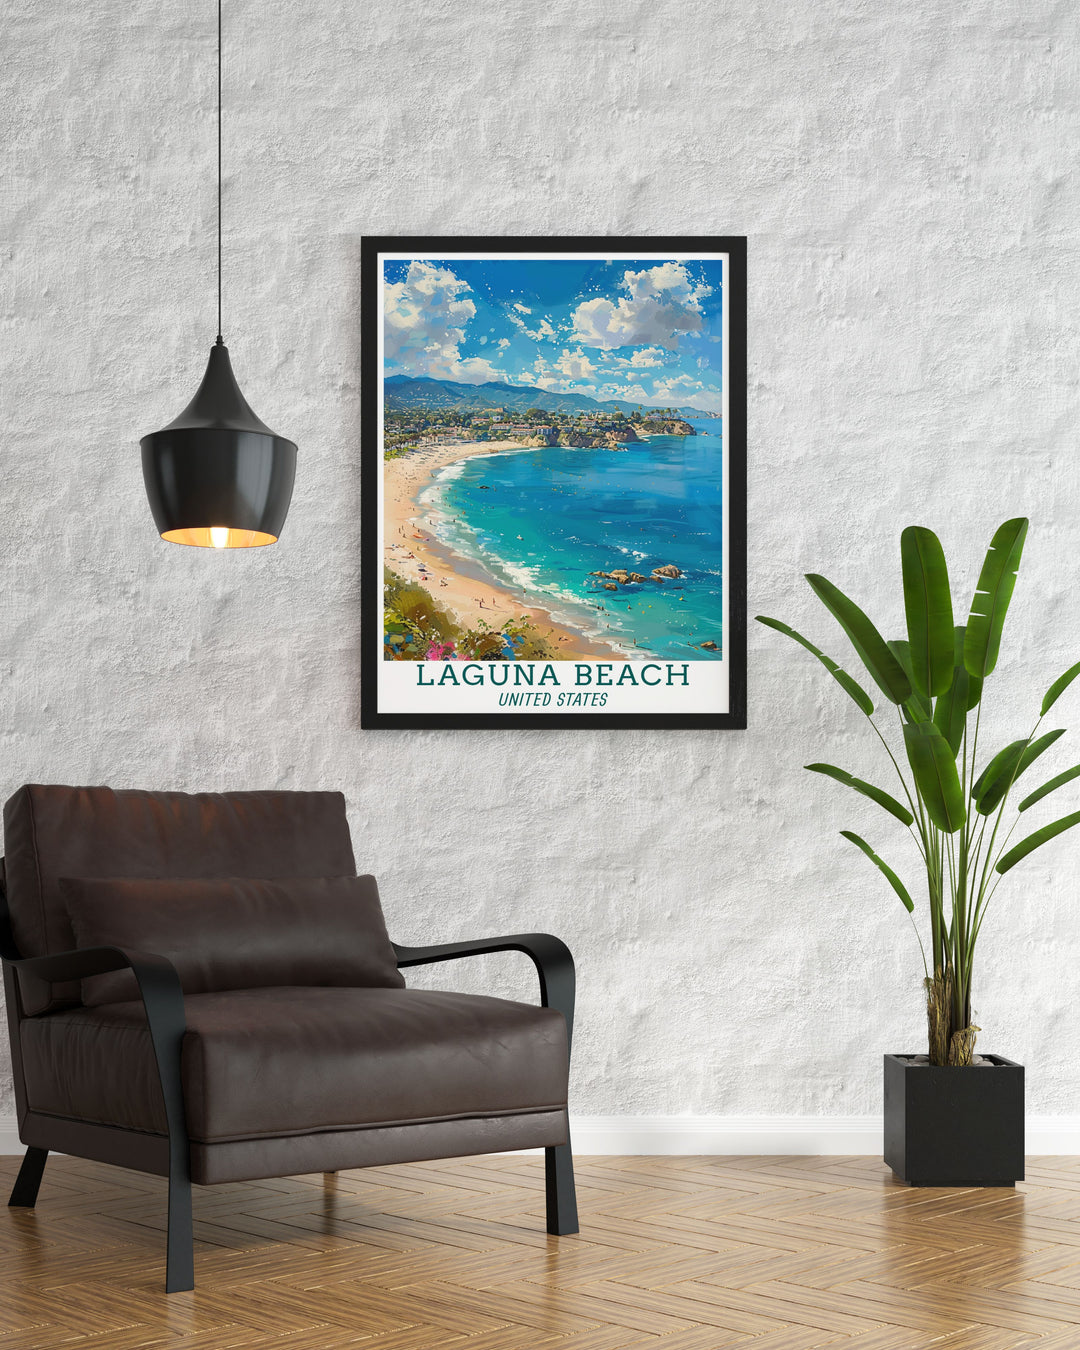 Colorful Main Beach Modern Decor in Laguna Beach Photo brings vibrant coastal scenery into your home perfect for creating a cozy and inviting atmosphere.